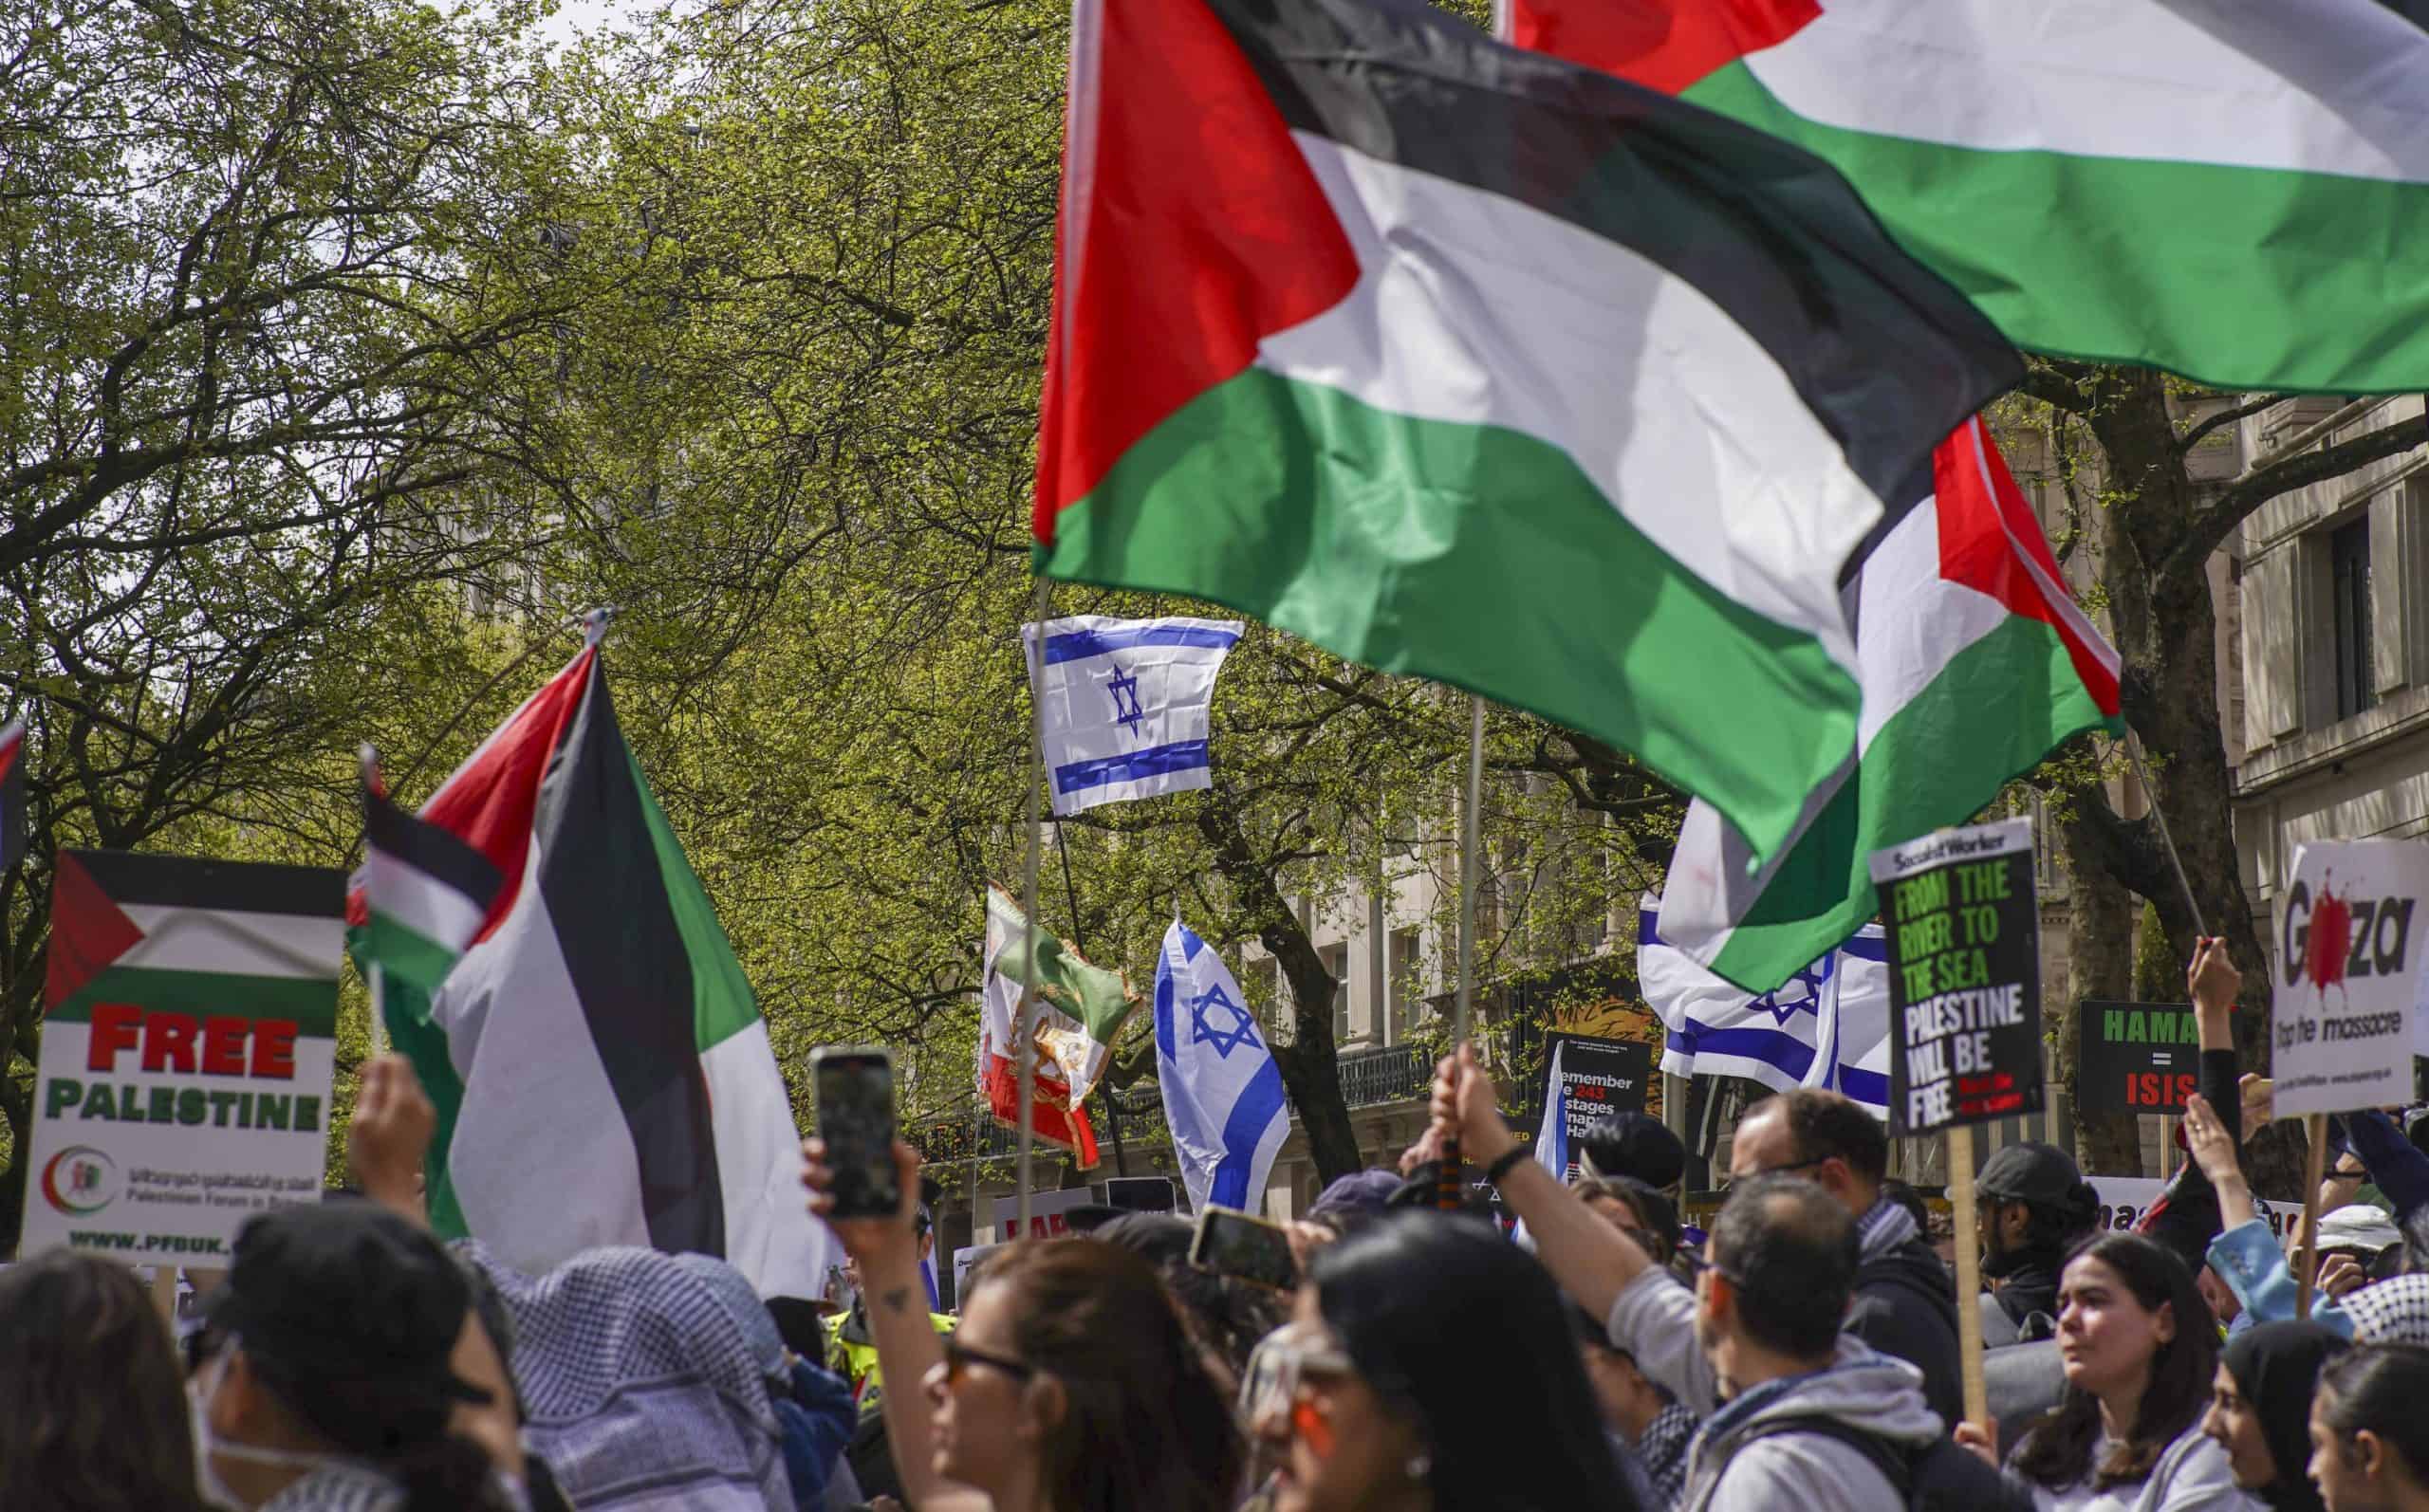 A special report: Inside the Met’s handling of the pro-Palestine protests